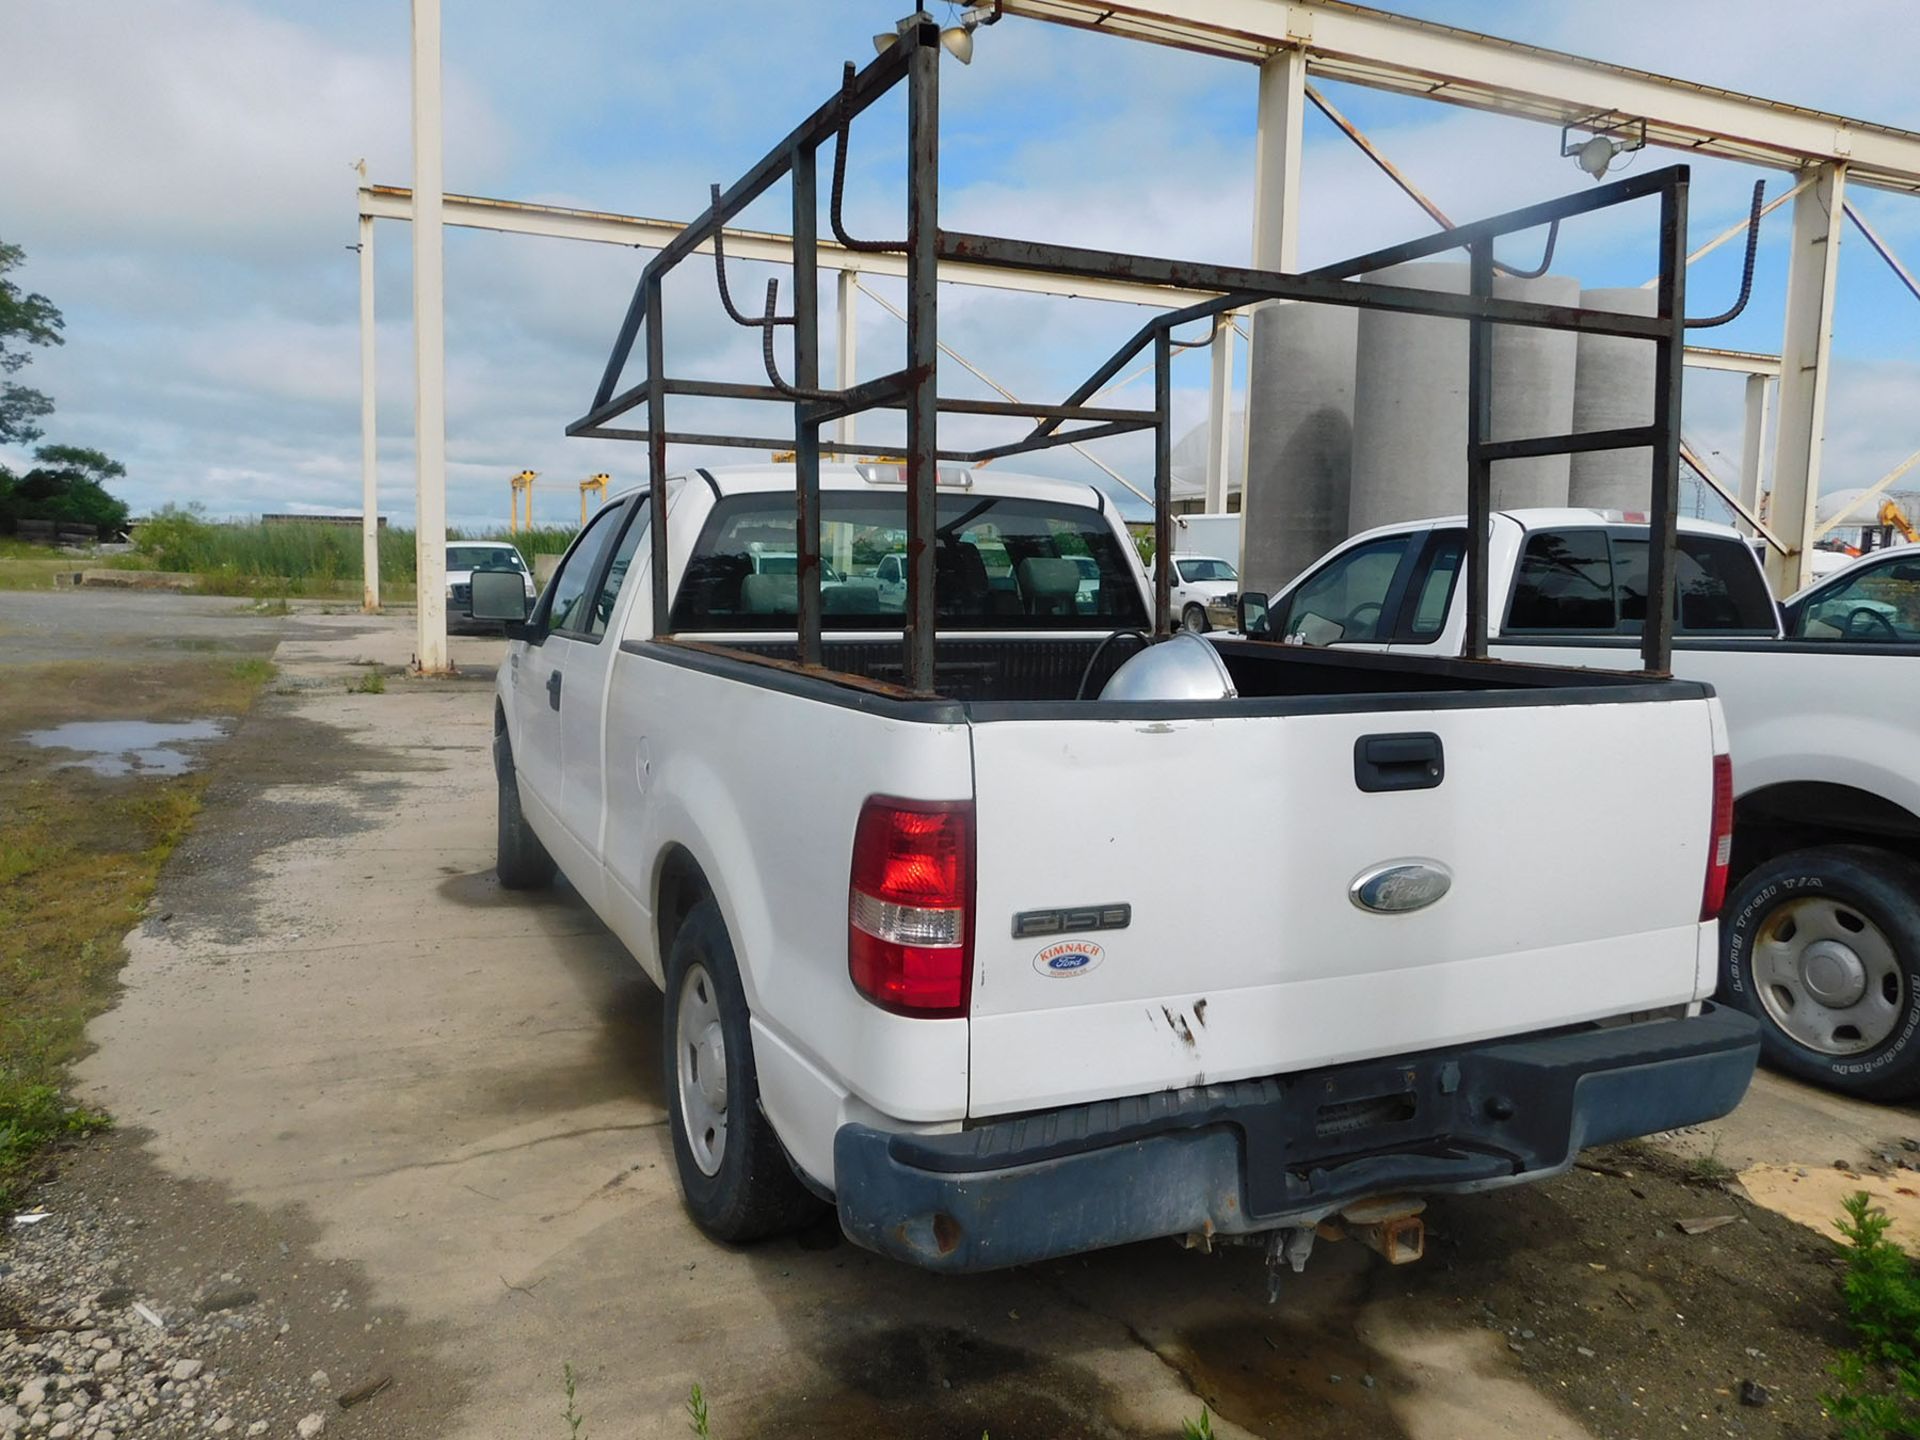 2007 F-150 XL TRITON TRUCK WITH WORK RACK; VIN 1FTRX12WX7NA52548 - Image 3 of 4